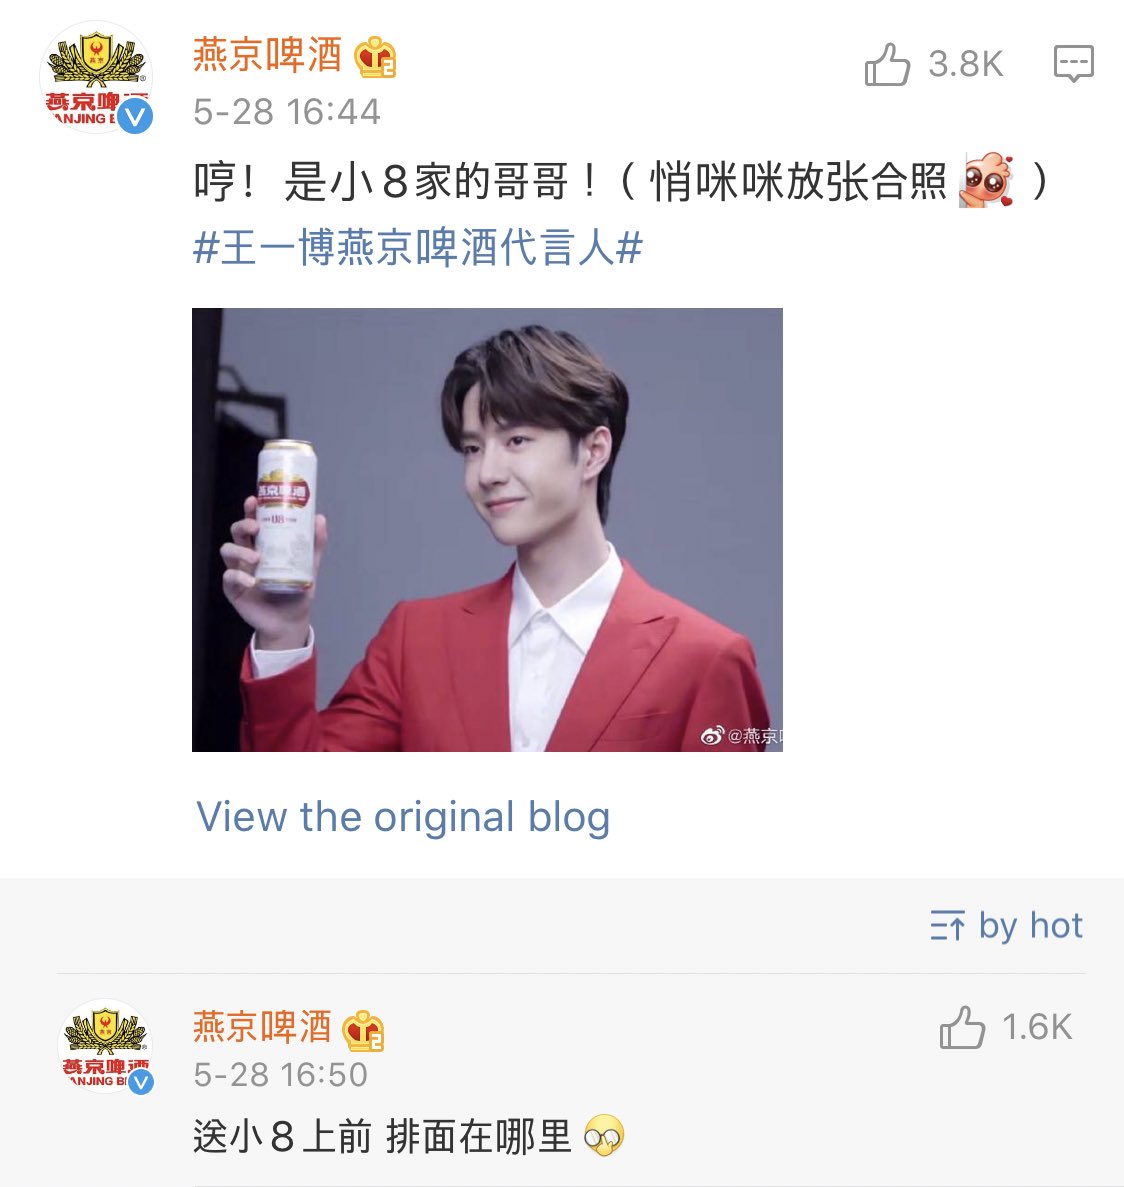 under lyfen’s comment:— colgate: remember to brush ur teeth after eating peanuts — 燕京啤酒 yanjing beer: it’s little 8’s! — yanjing: heng! it’s the gege from little 8 family! (quietly put a photo of us )— 名创优品 miniso: heng, yibo gege is clearly shopping with me 